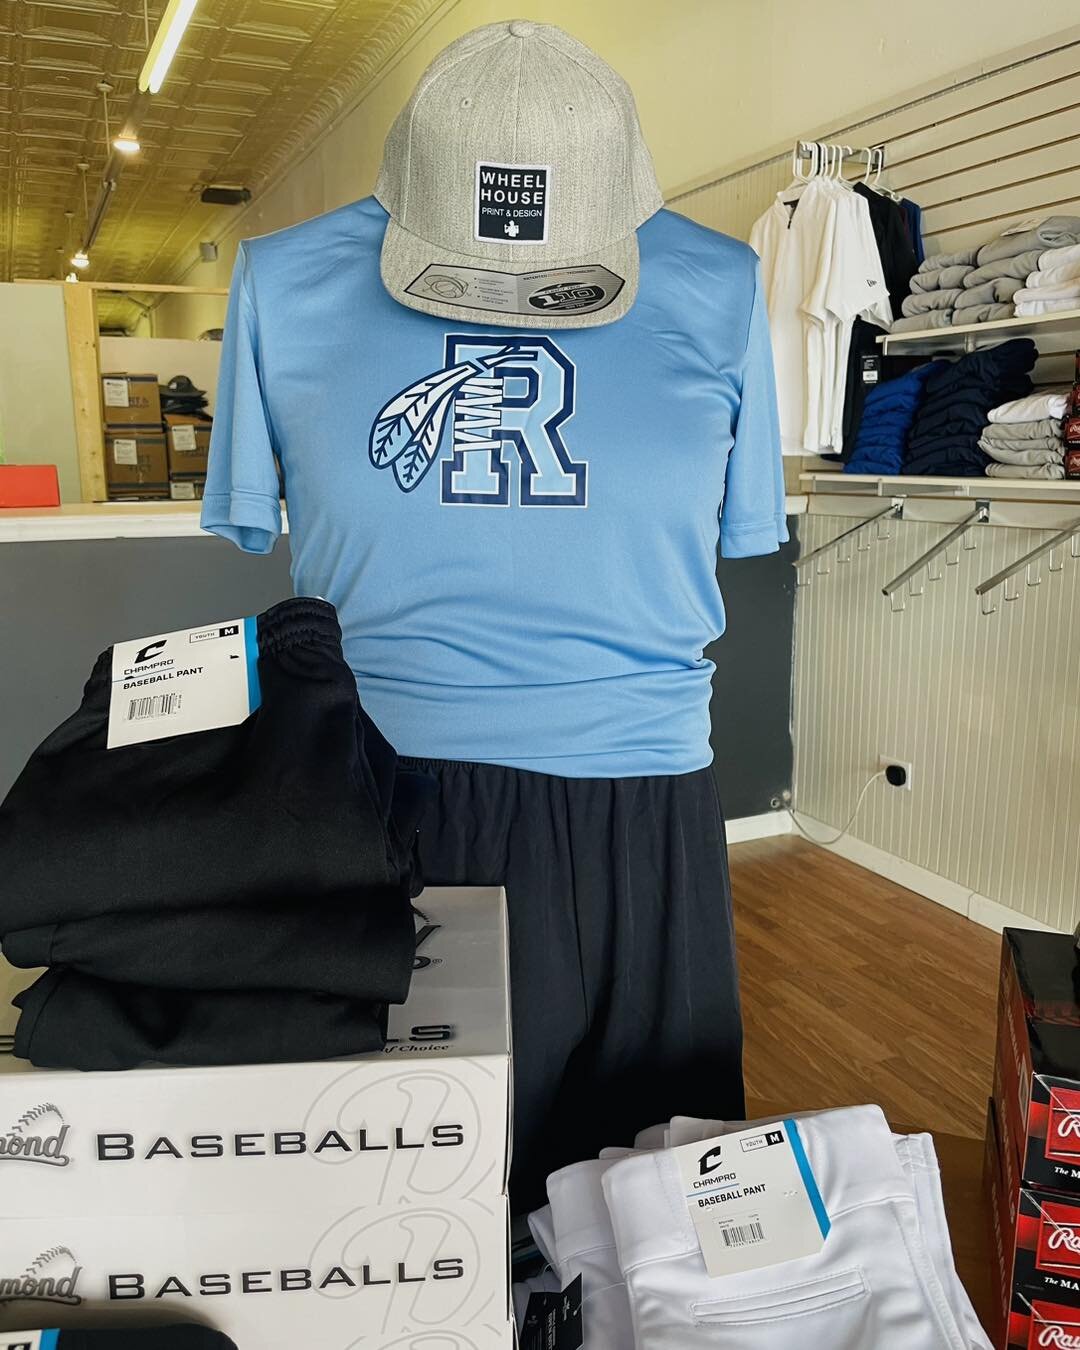 ⚾️ Baseball season is getting ramped up, and we know your player needs pants and practice gear! To celebrate baseball season coming in full swing we are offering our in stock pants for $12😮 Stop by and grab some pants, a belt, some socks, some pract